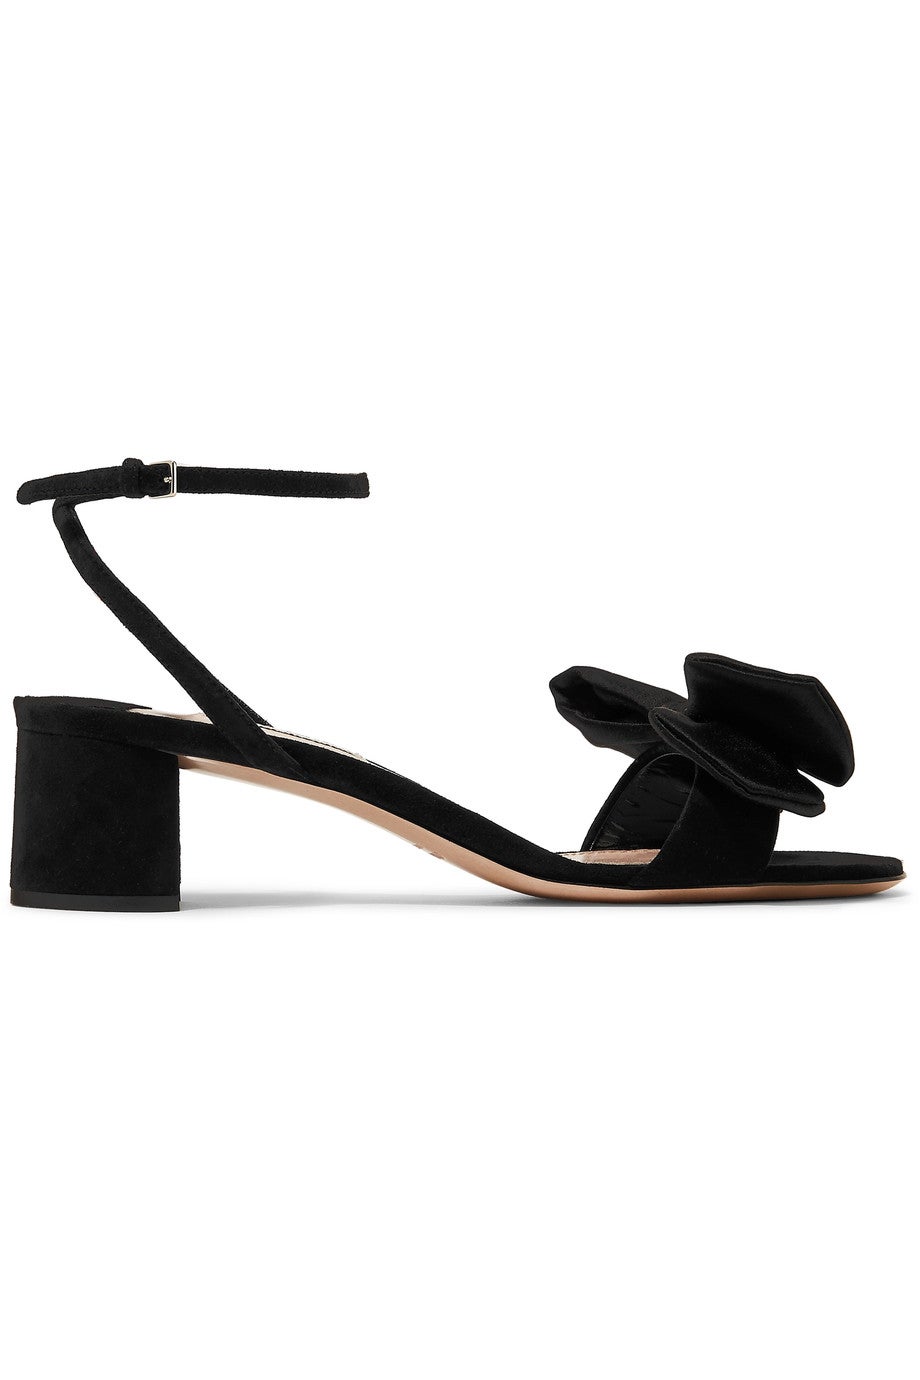 Block Heel Sandals That You Can Actually Stand In All Day
